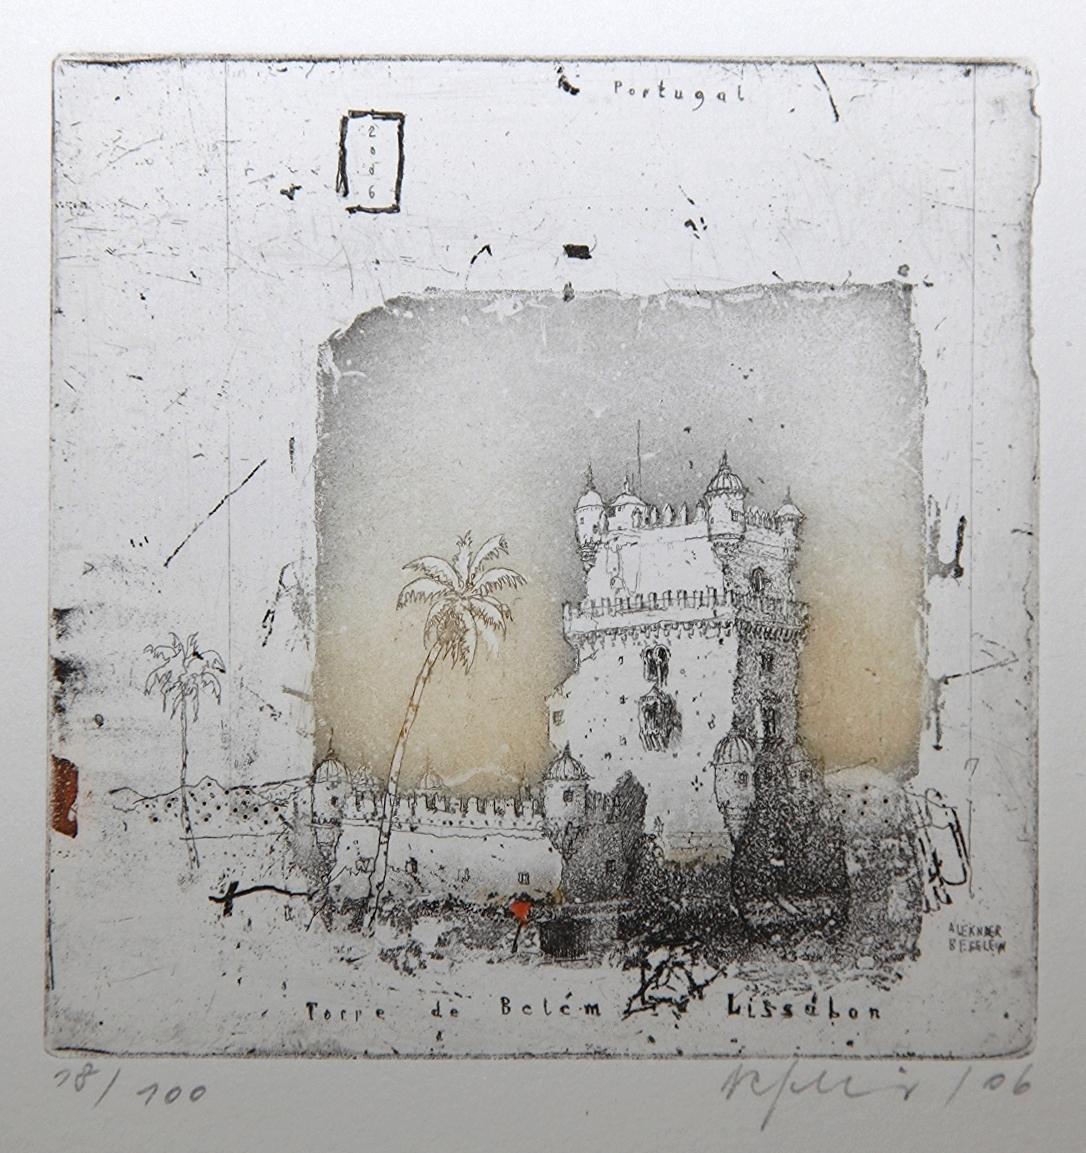 'Lisbon' by Alexander Befelein- beautiful contemporary limited edition print of the Portuguese city architecture. A graphic miniature etching has many layers of details - it's the best choice for small interiors. The print looks like a drawing, with